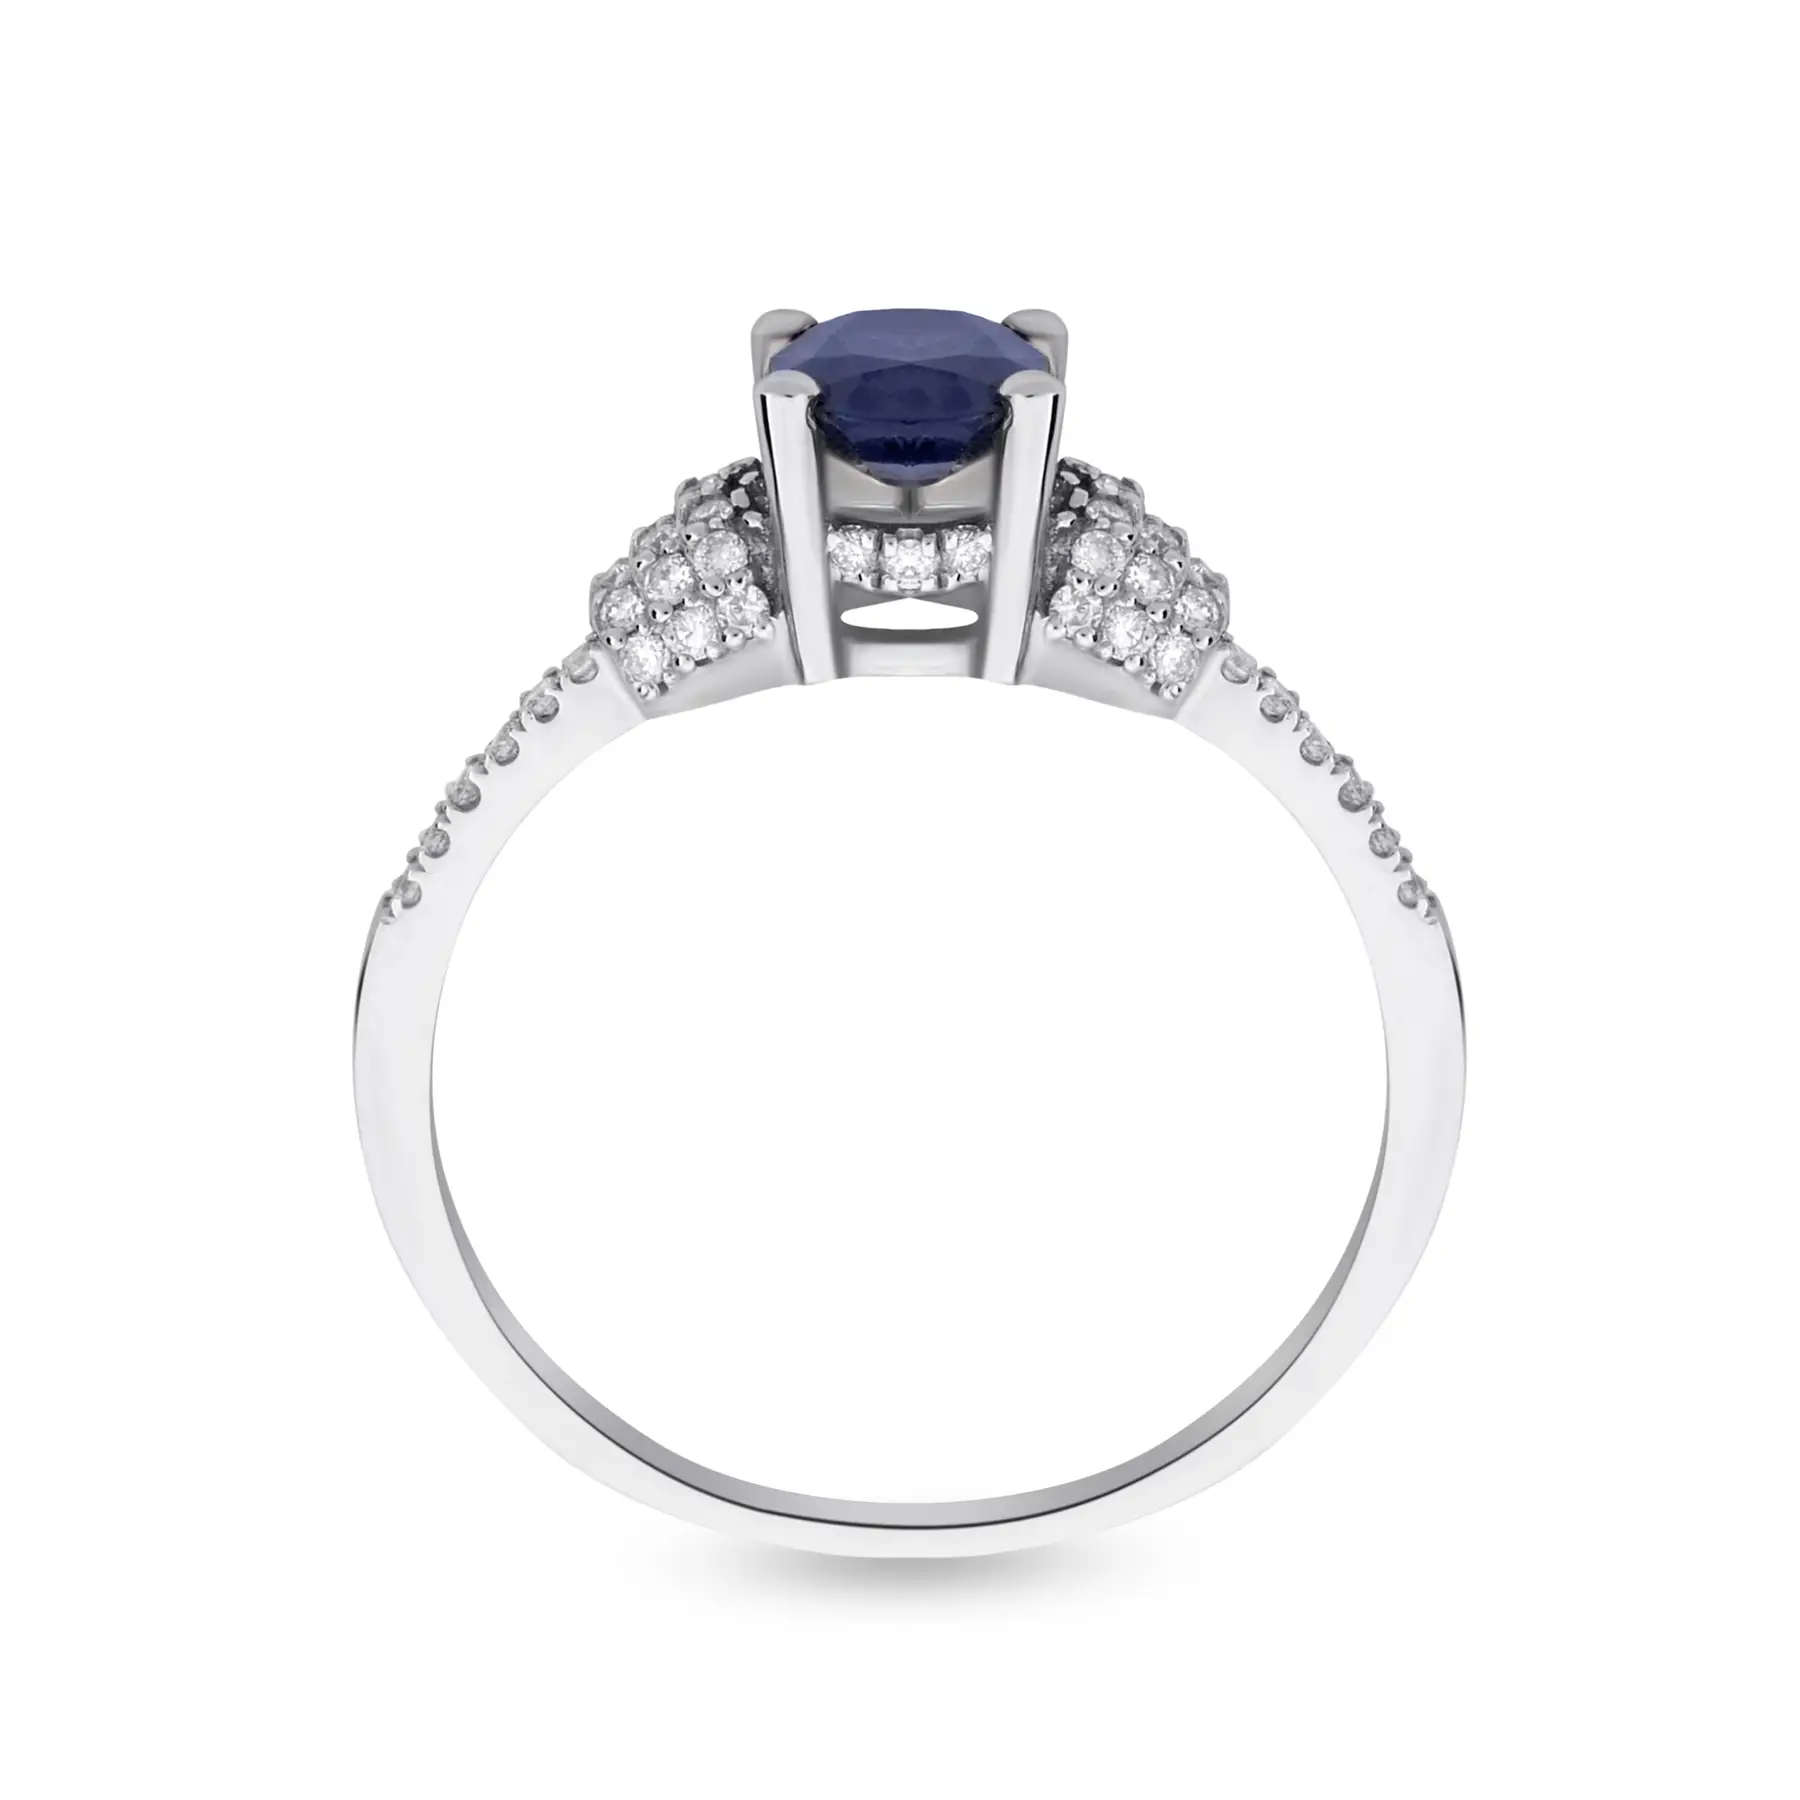 18k white gold 0.90 ct. blue sapphire and 0.23 ct.tw . diamonds ring 31099000132512